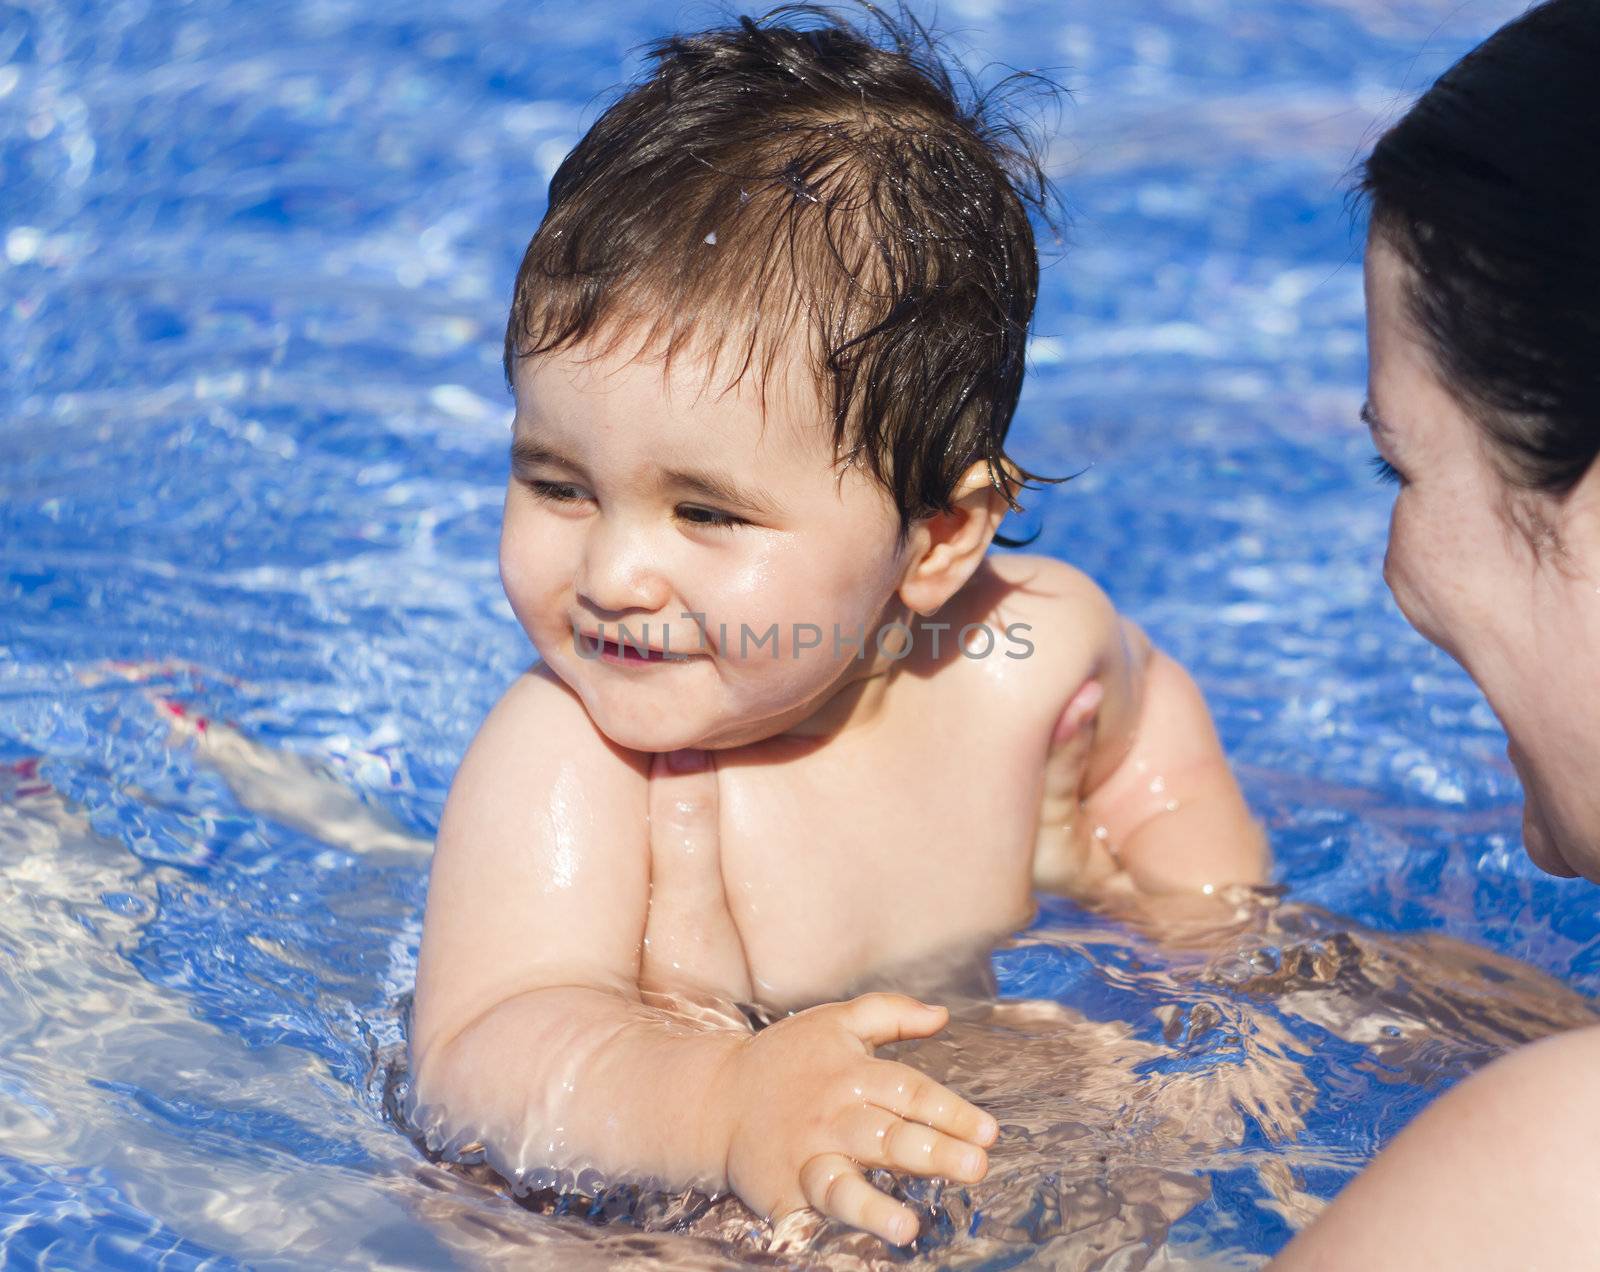 Newborn baby playing in the pool with his mother by FernandoCortes